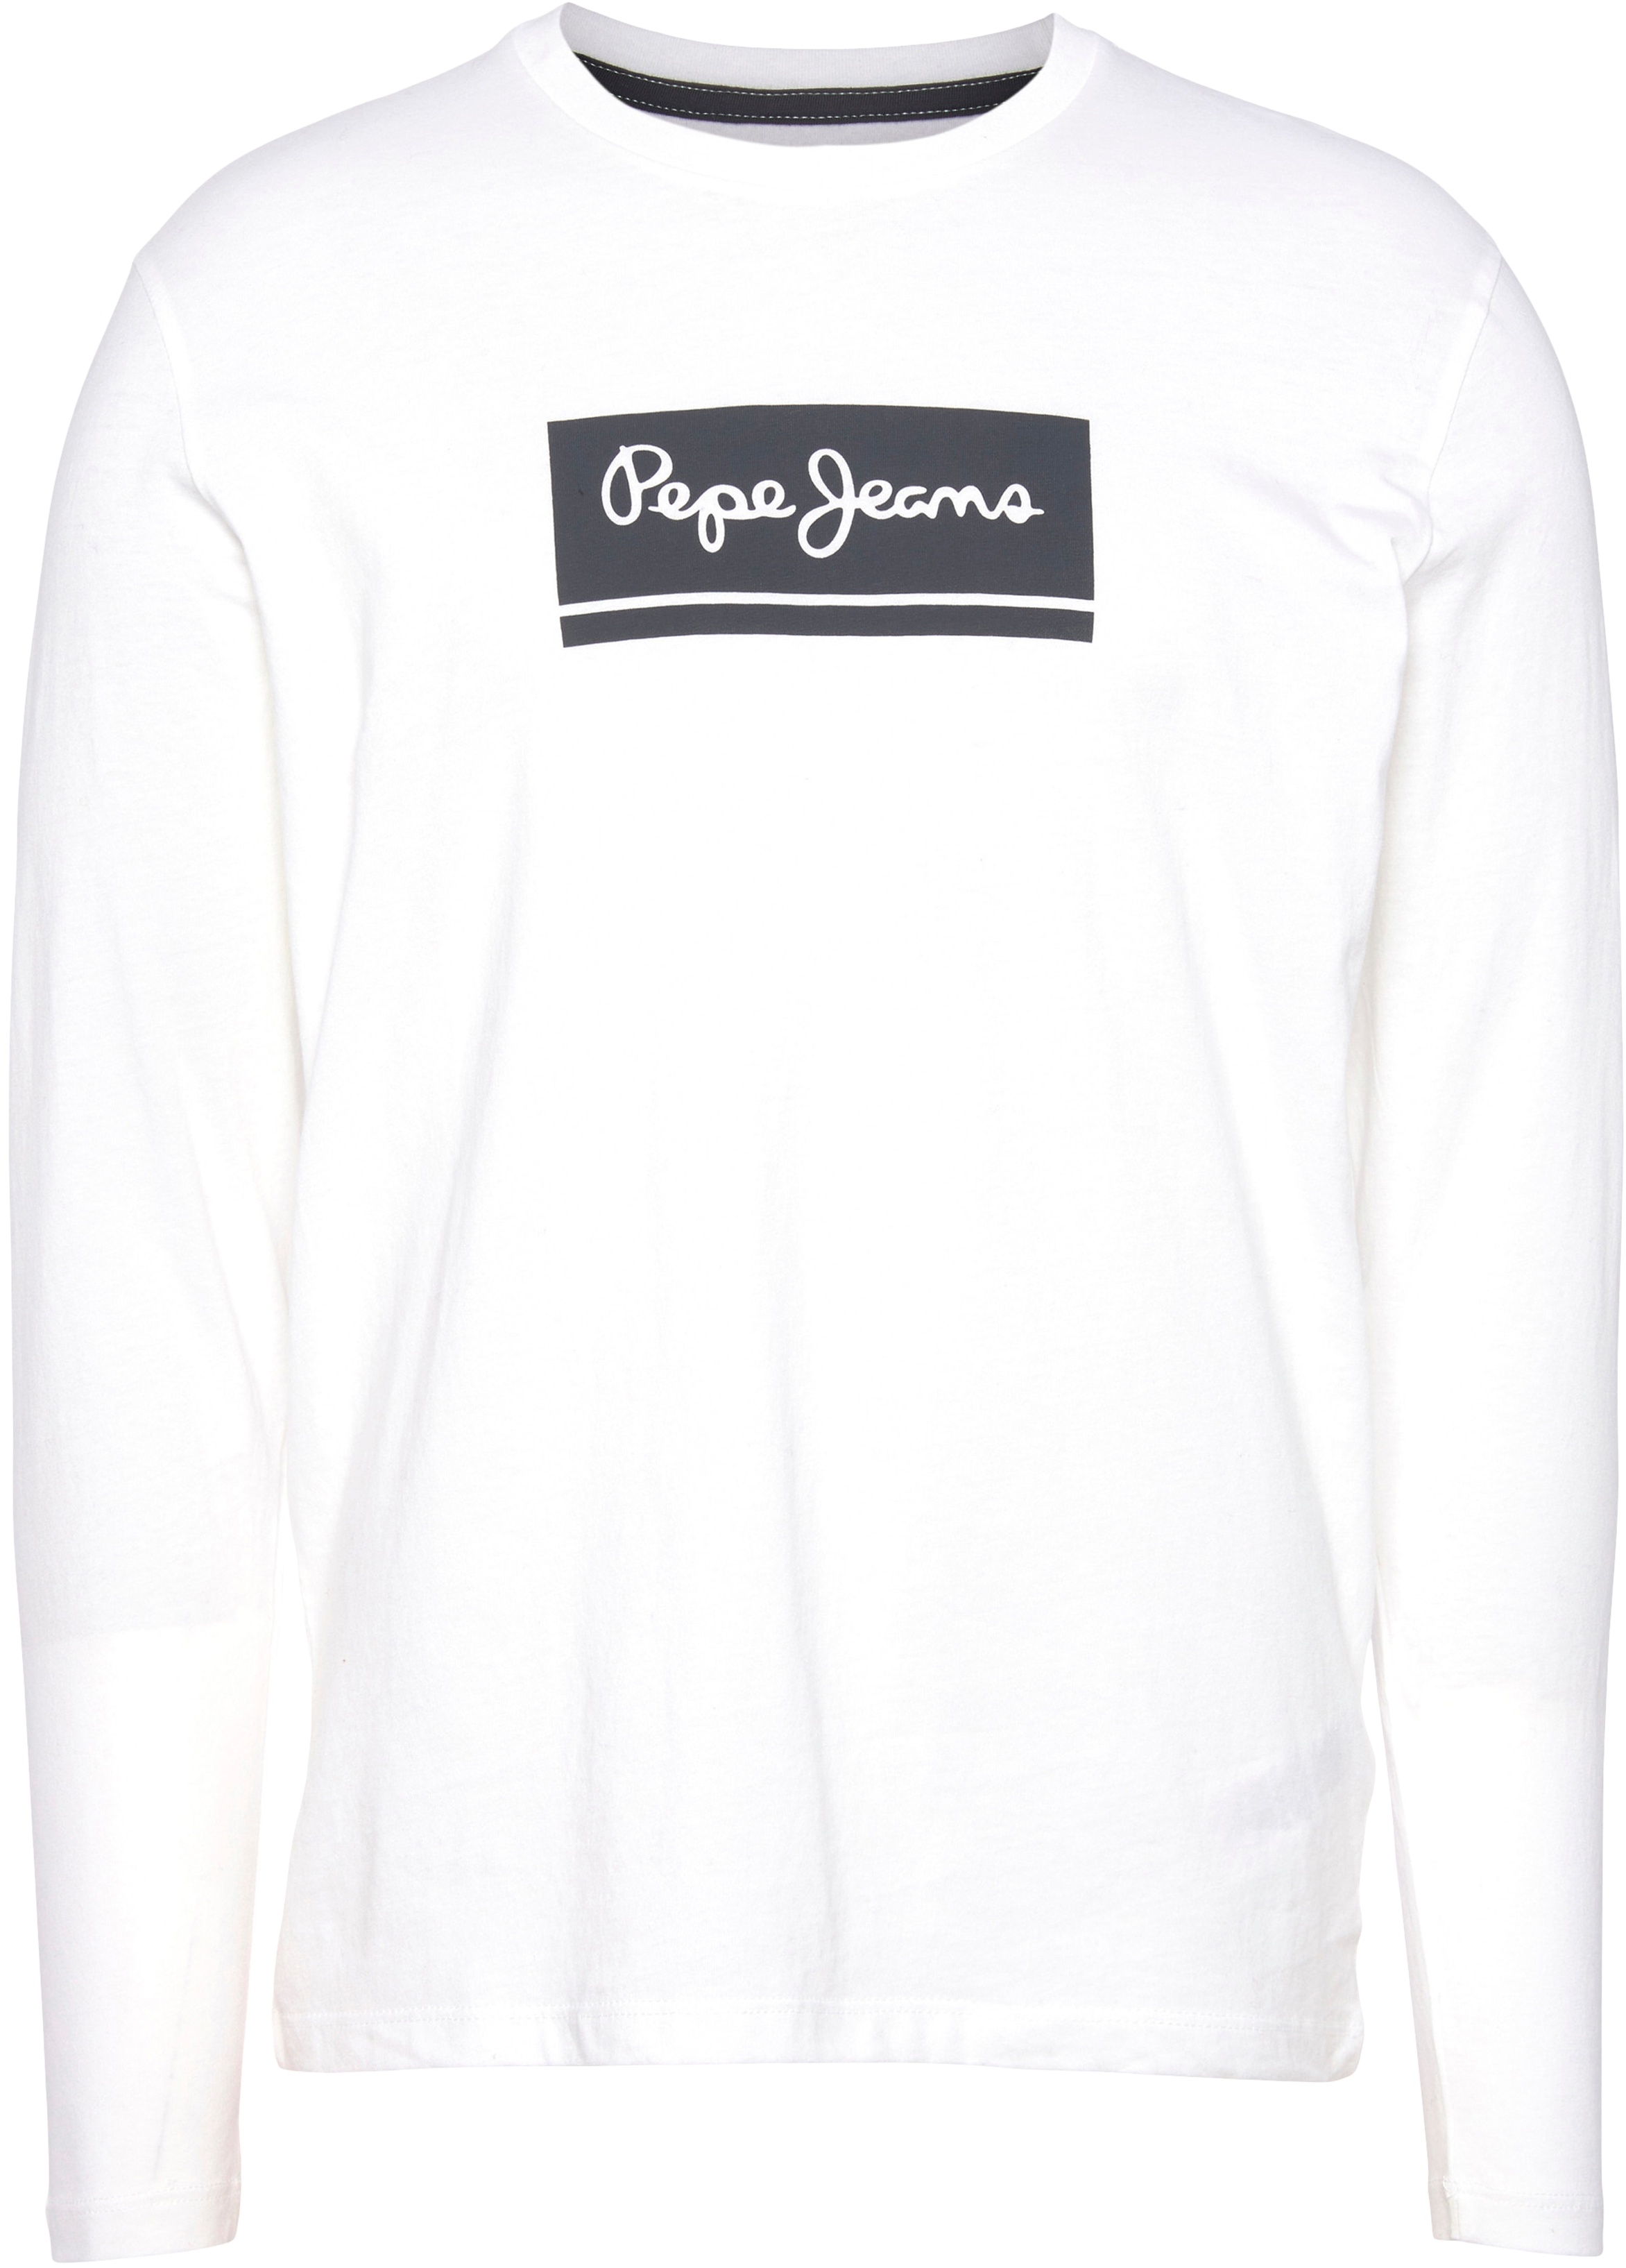 Pepe Jeans Longsleeve »Anthony« Pepe Jeans white XS